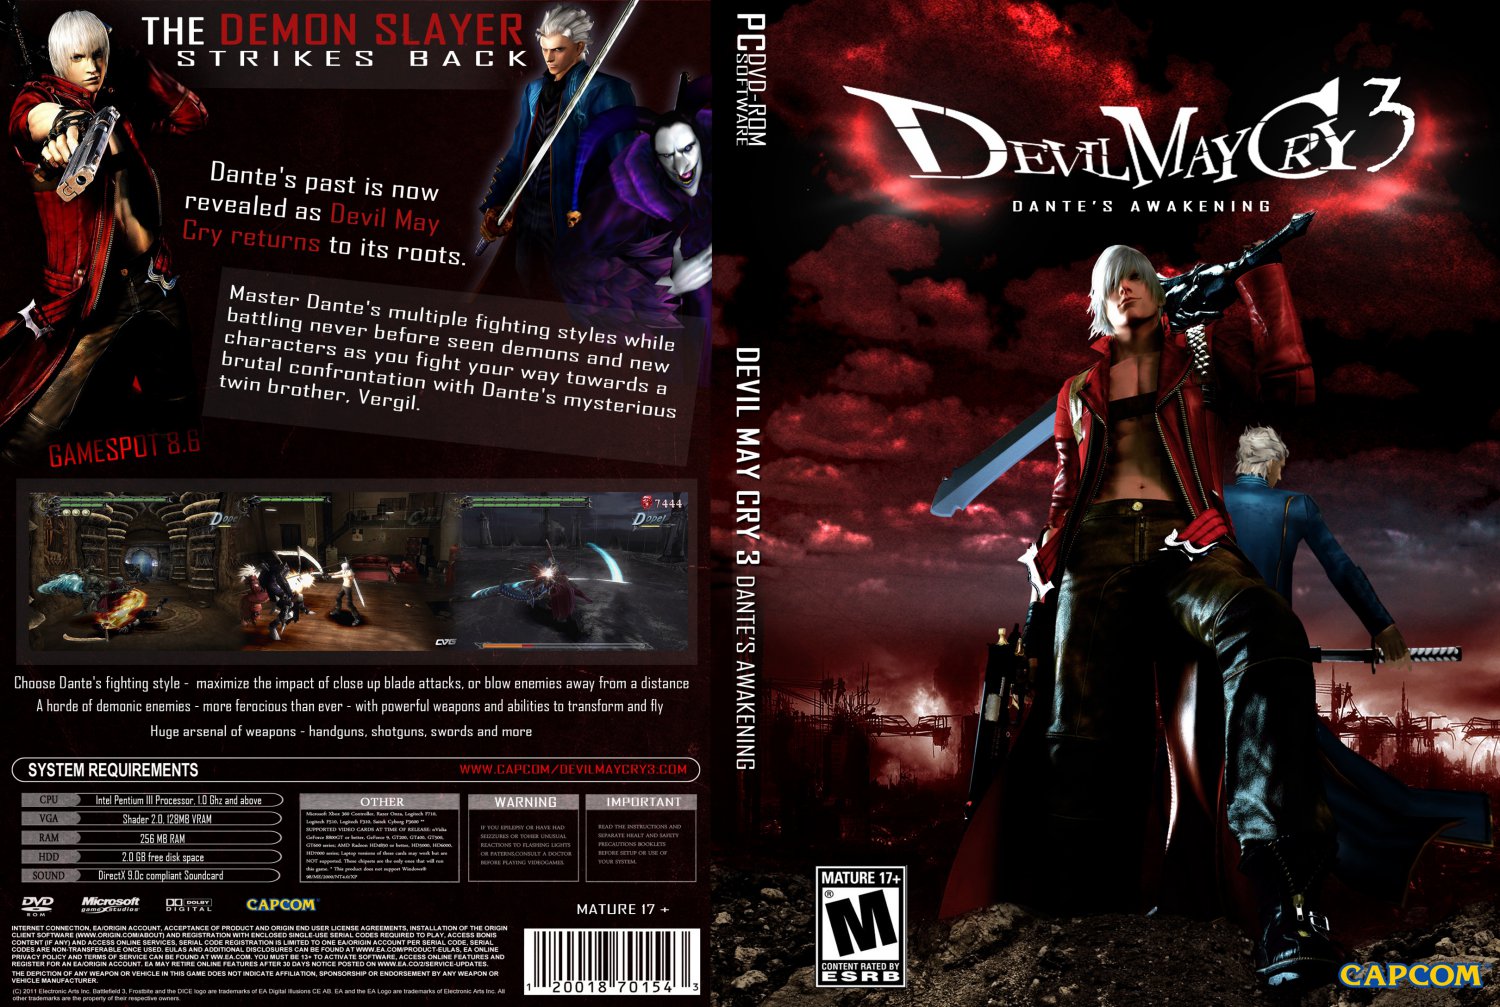 Devil may cry 3 steam not found фото 101